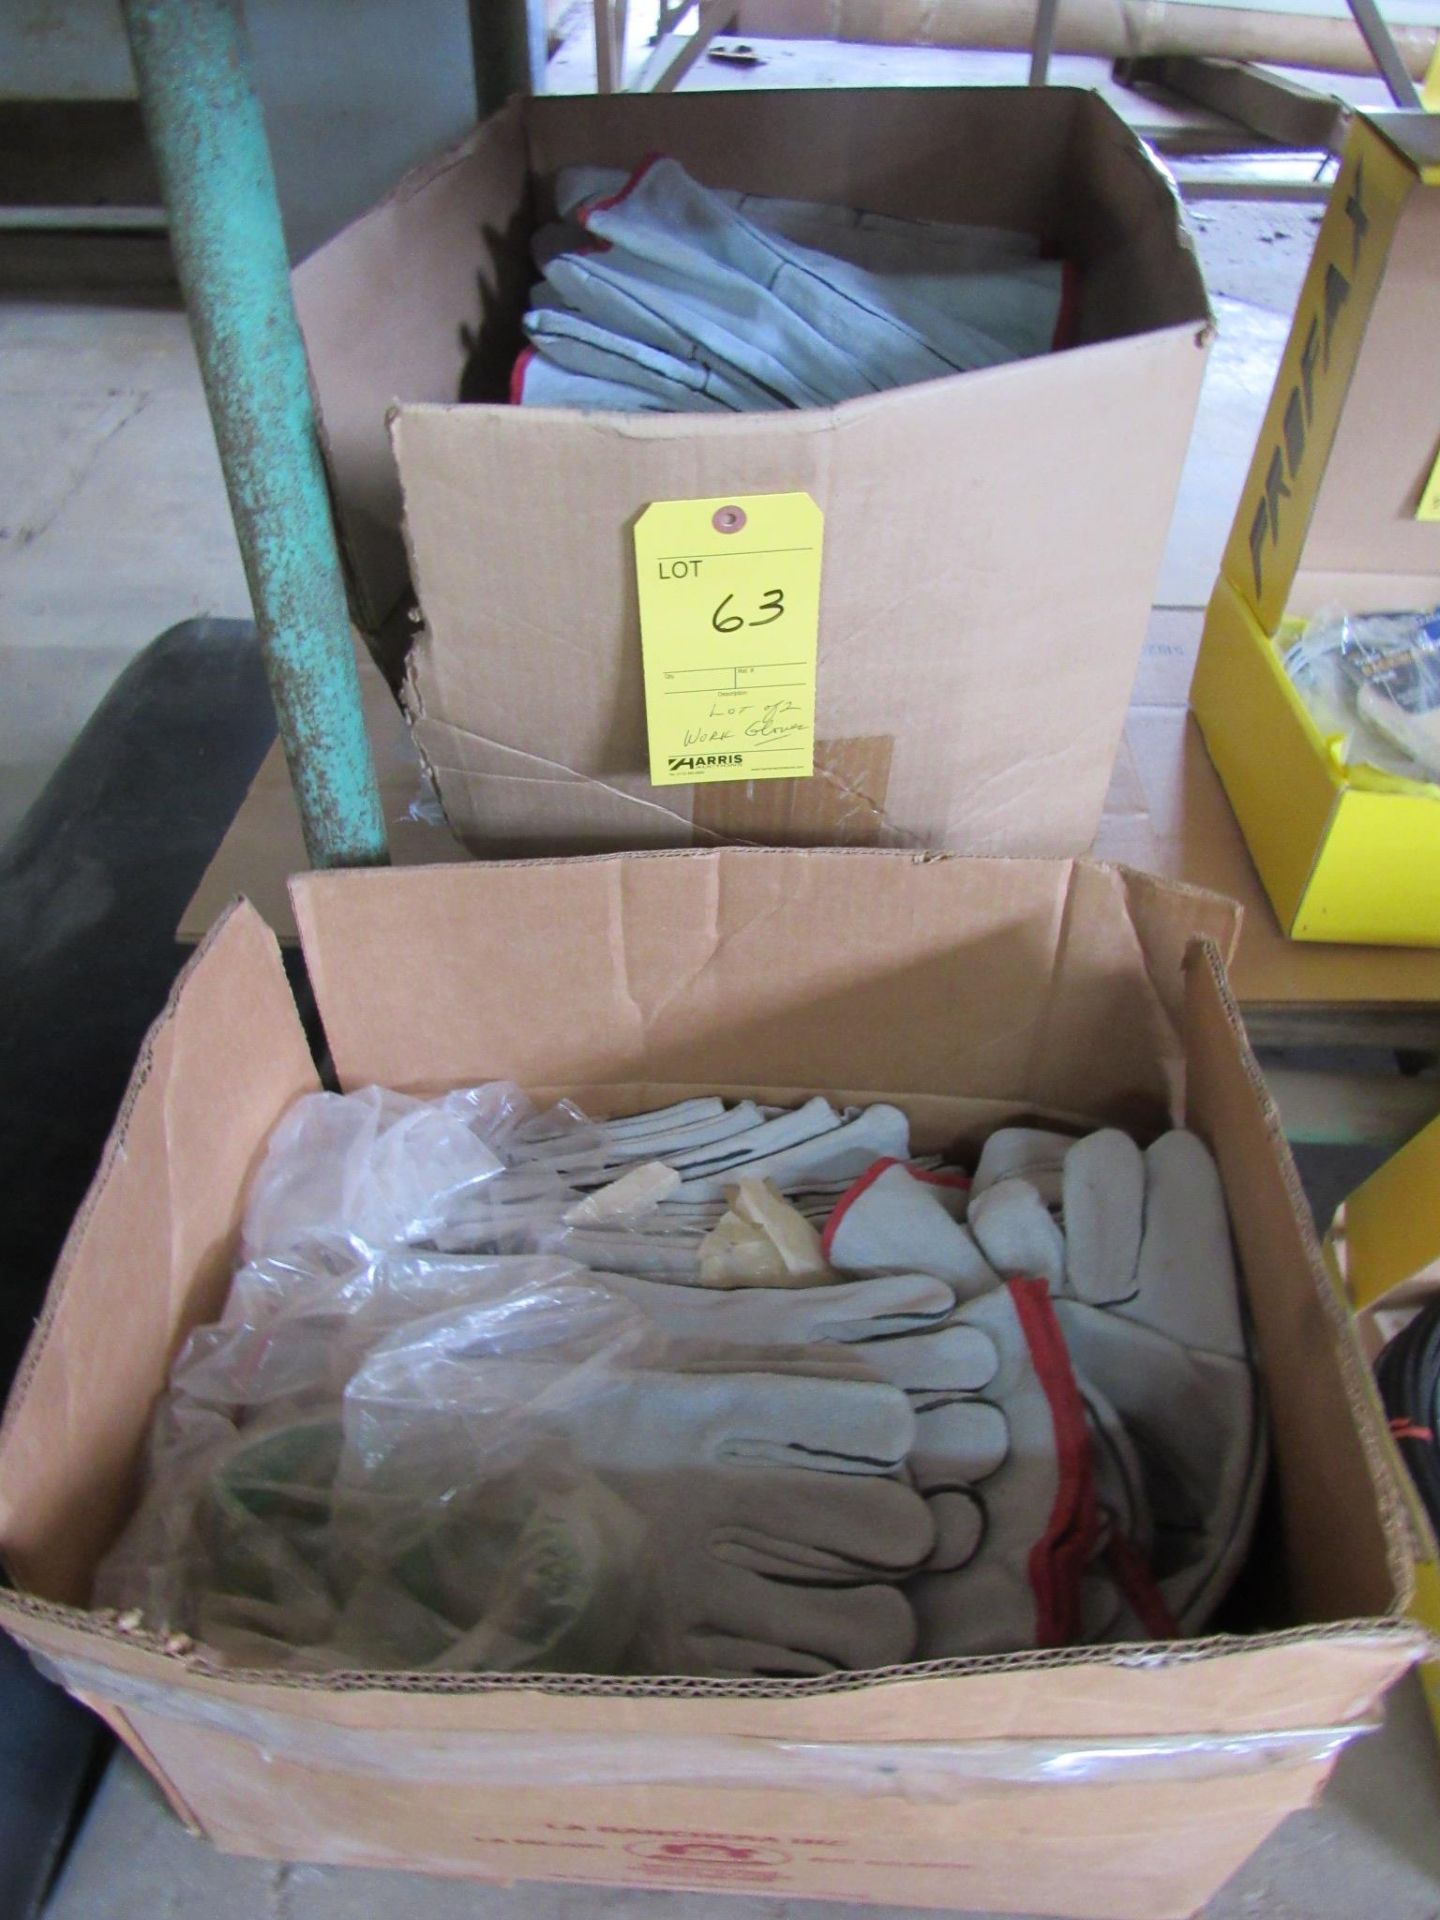 Work Gloves - 2 boxes